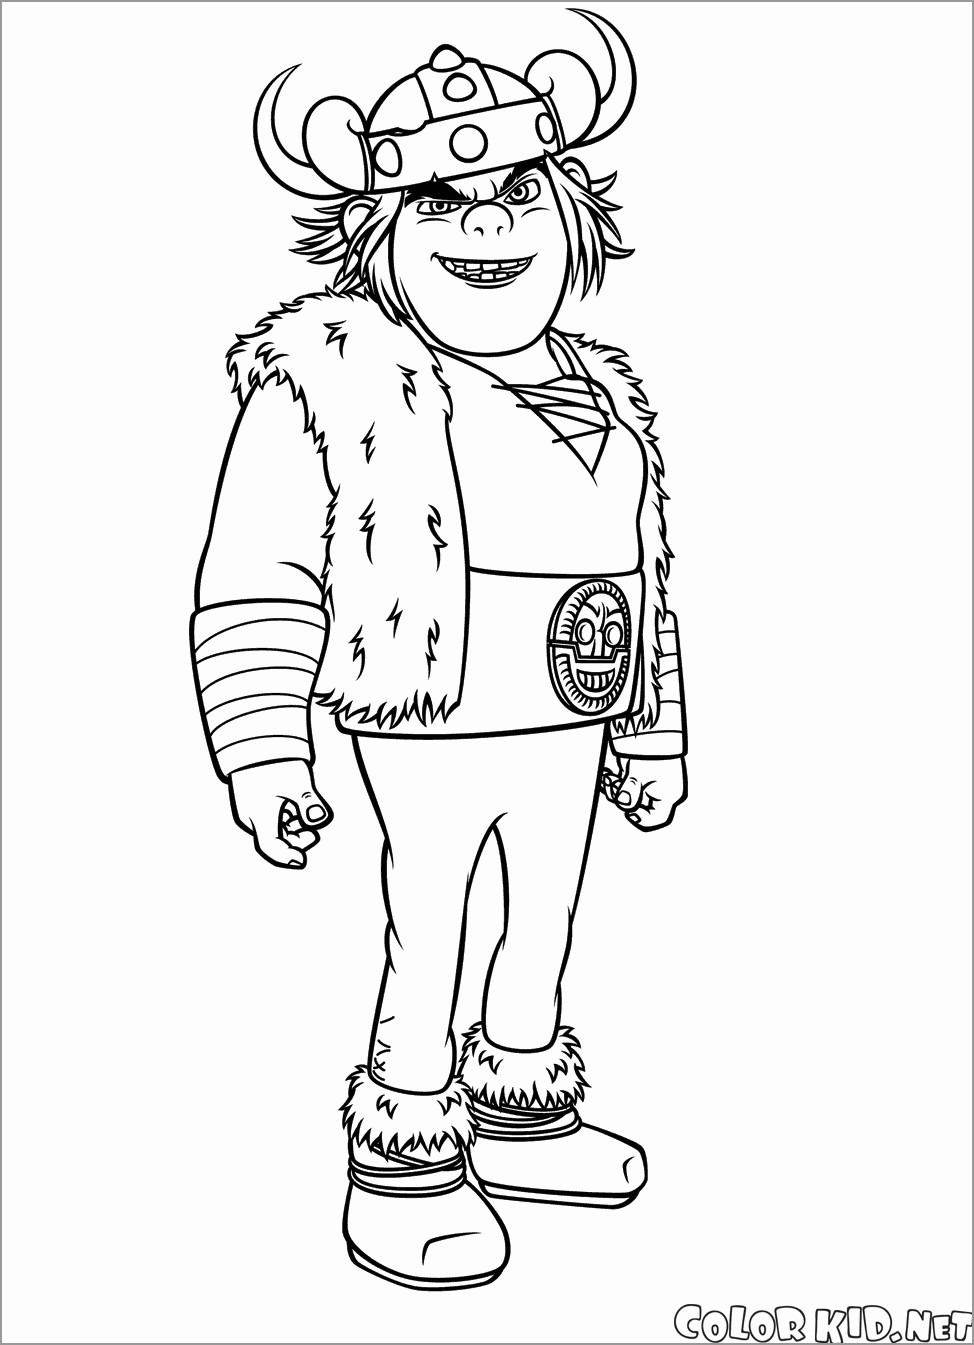 How to Train Your Dragon Snotlout Jorgenson Coloring Page